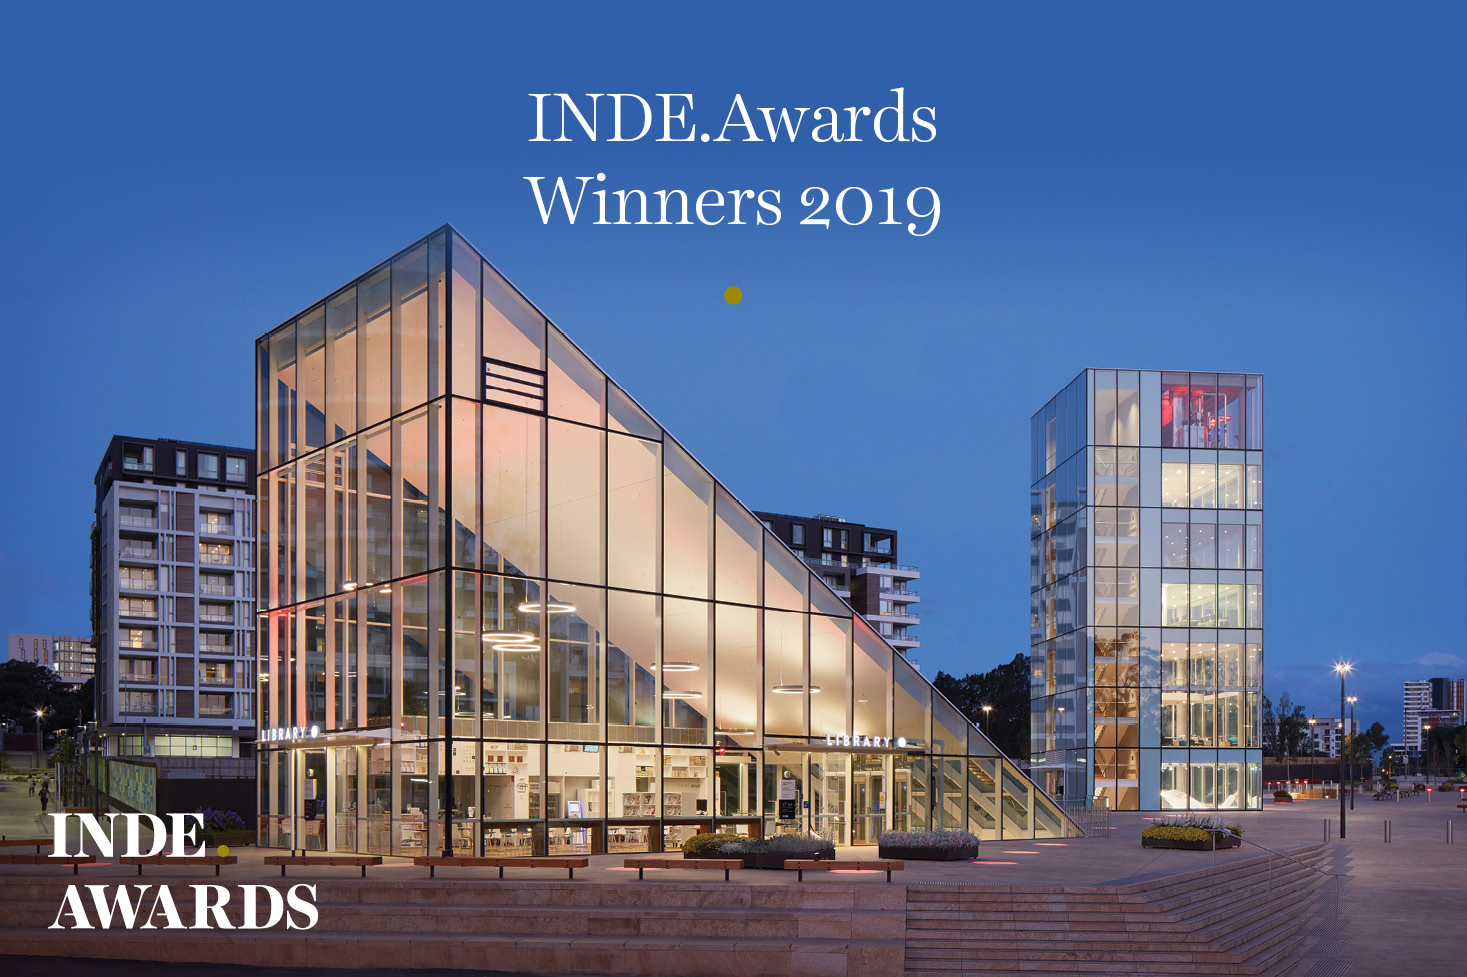 Proudly Presenting Your 2019 INDE.Awards Winners!